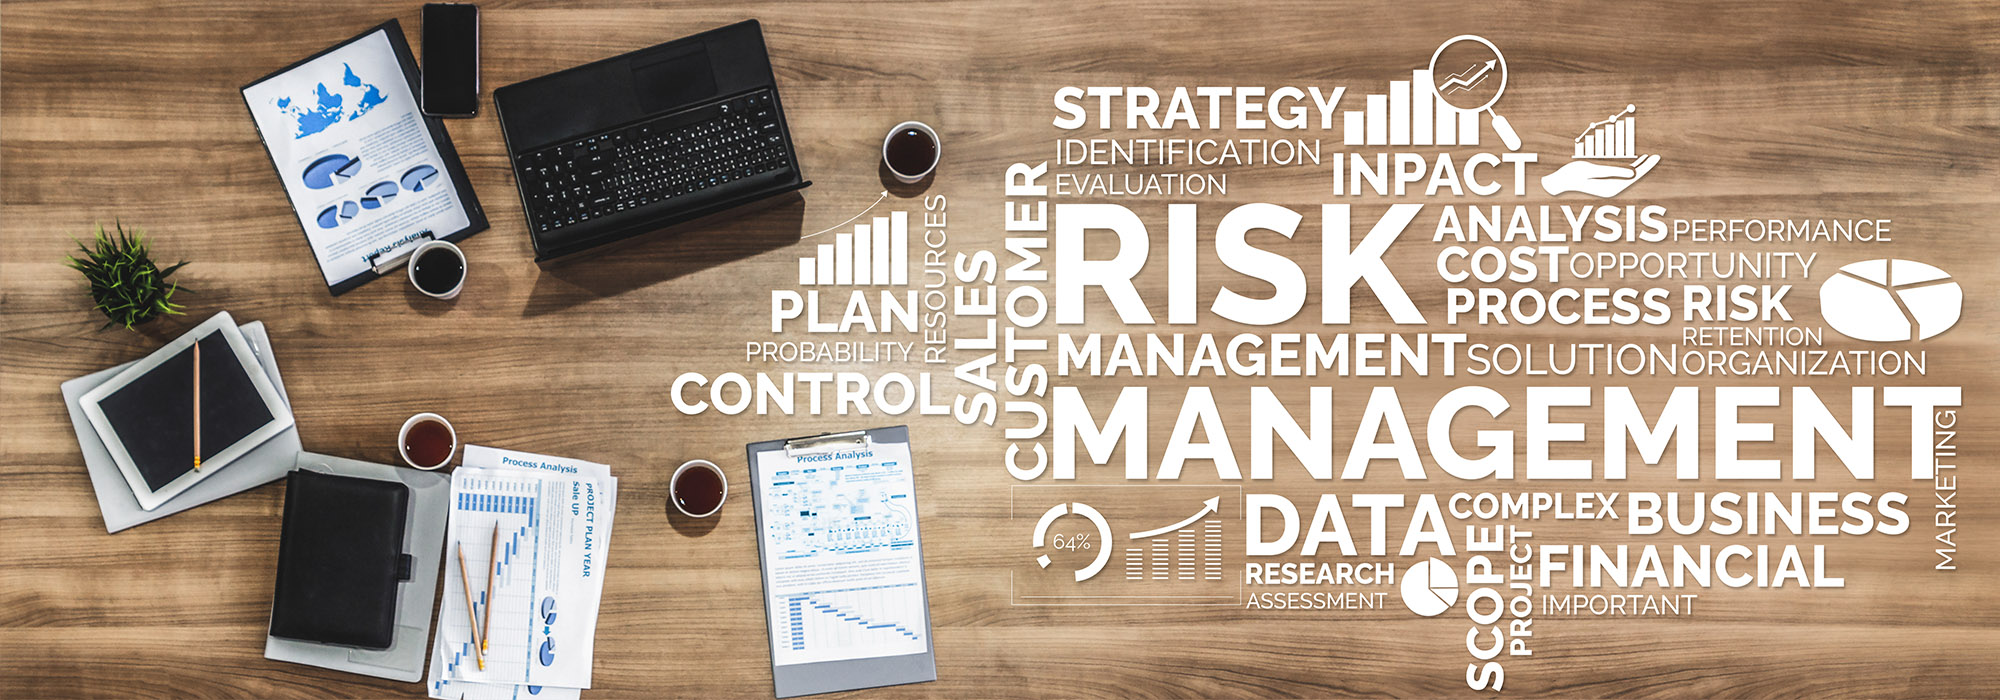 Risk management to avoid crisis